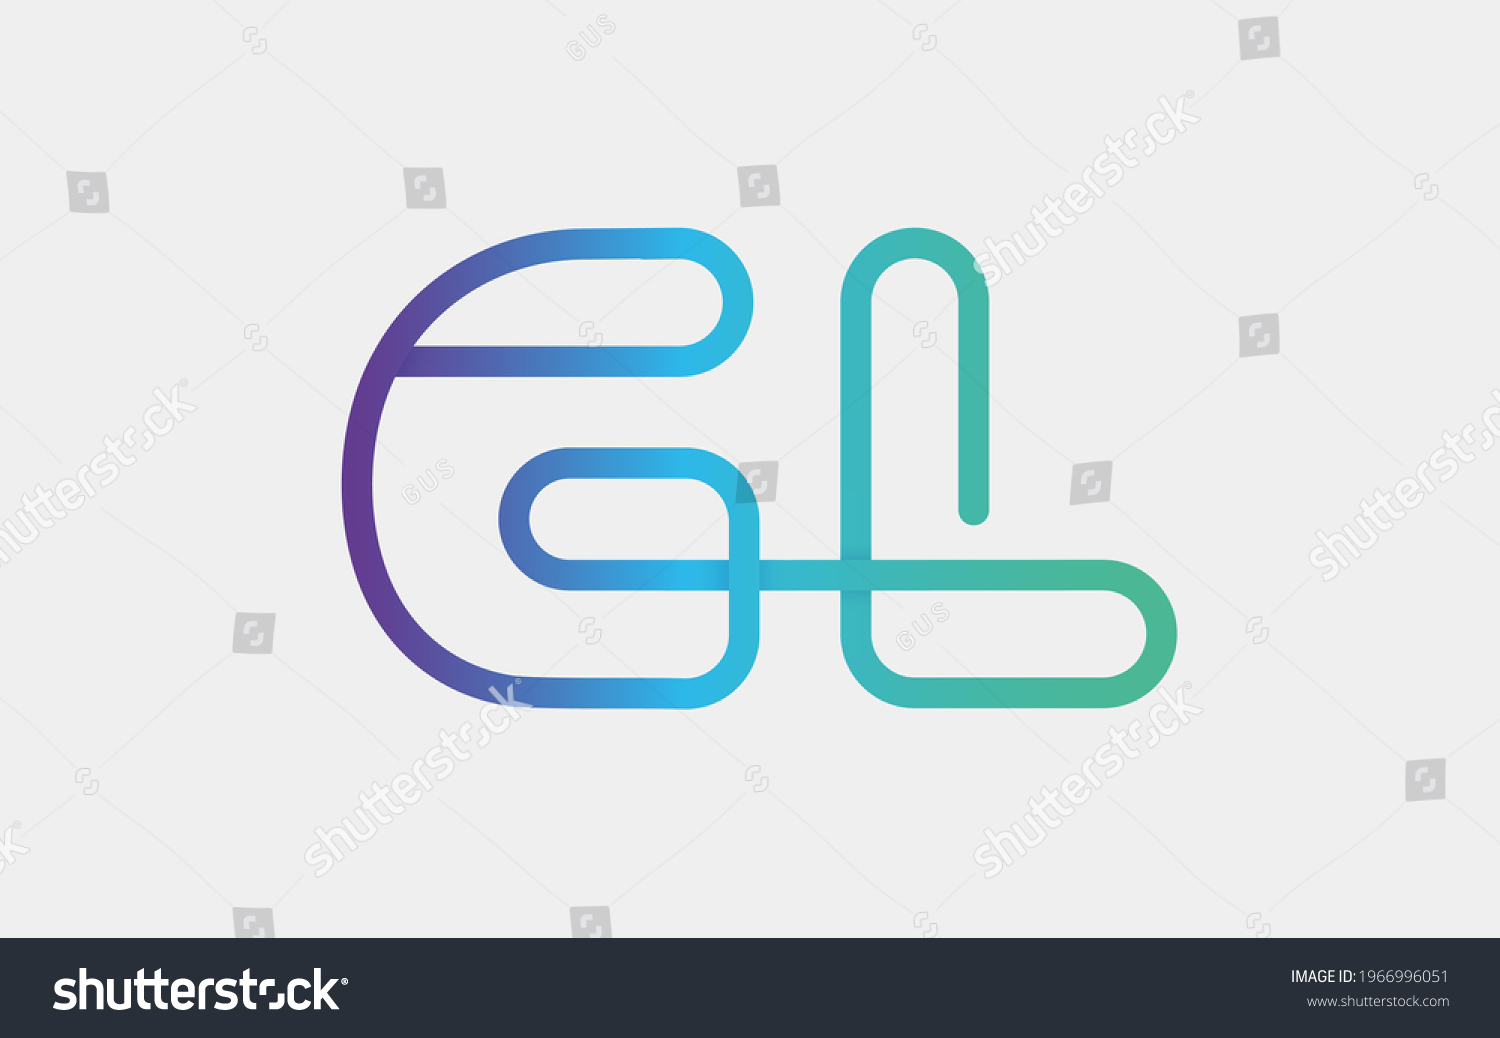 SVG of GL Monogram tech with a monoline style. Looks playful but still simple and futuristic. A perfect logo for your tech company or any futuristic design project. svg